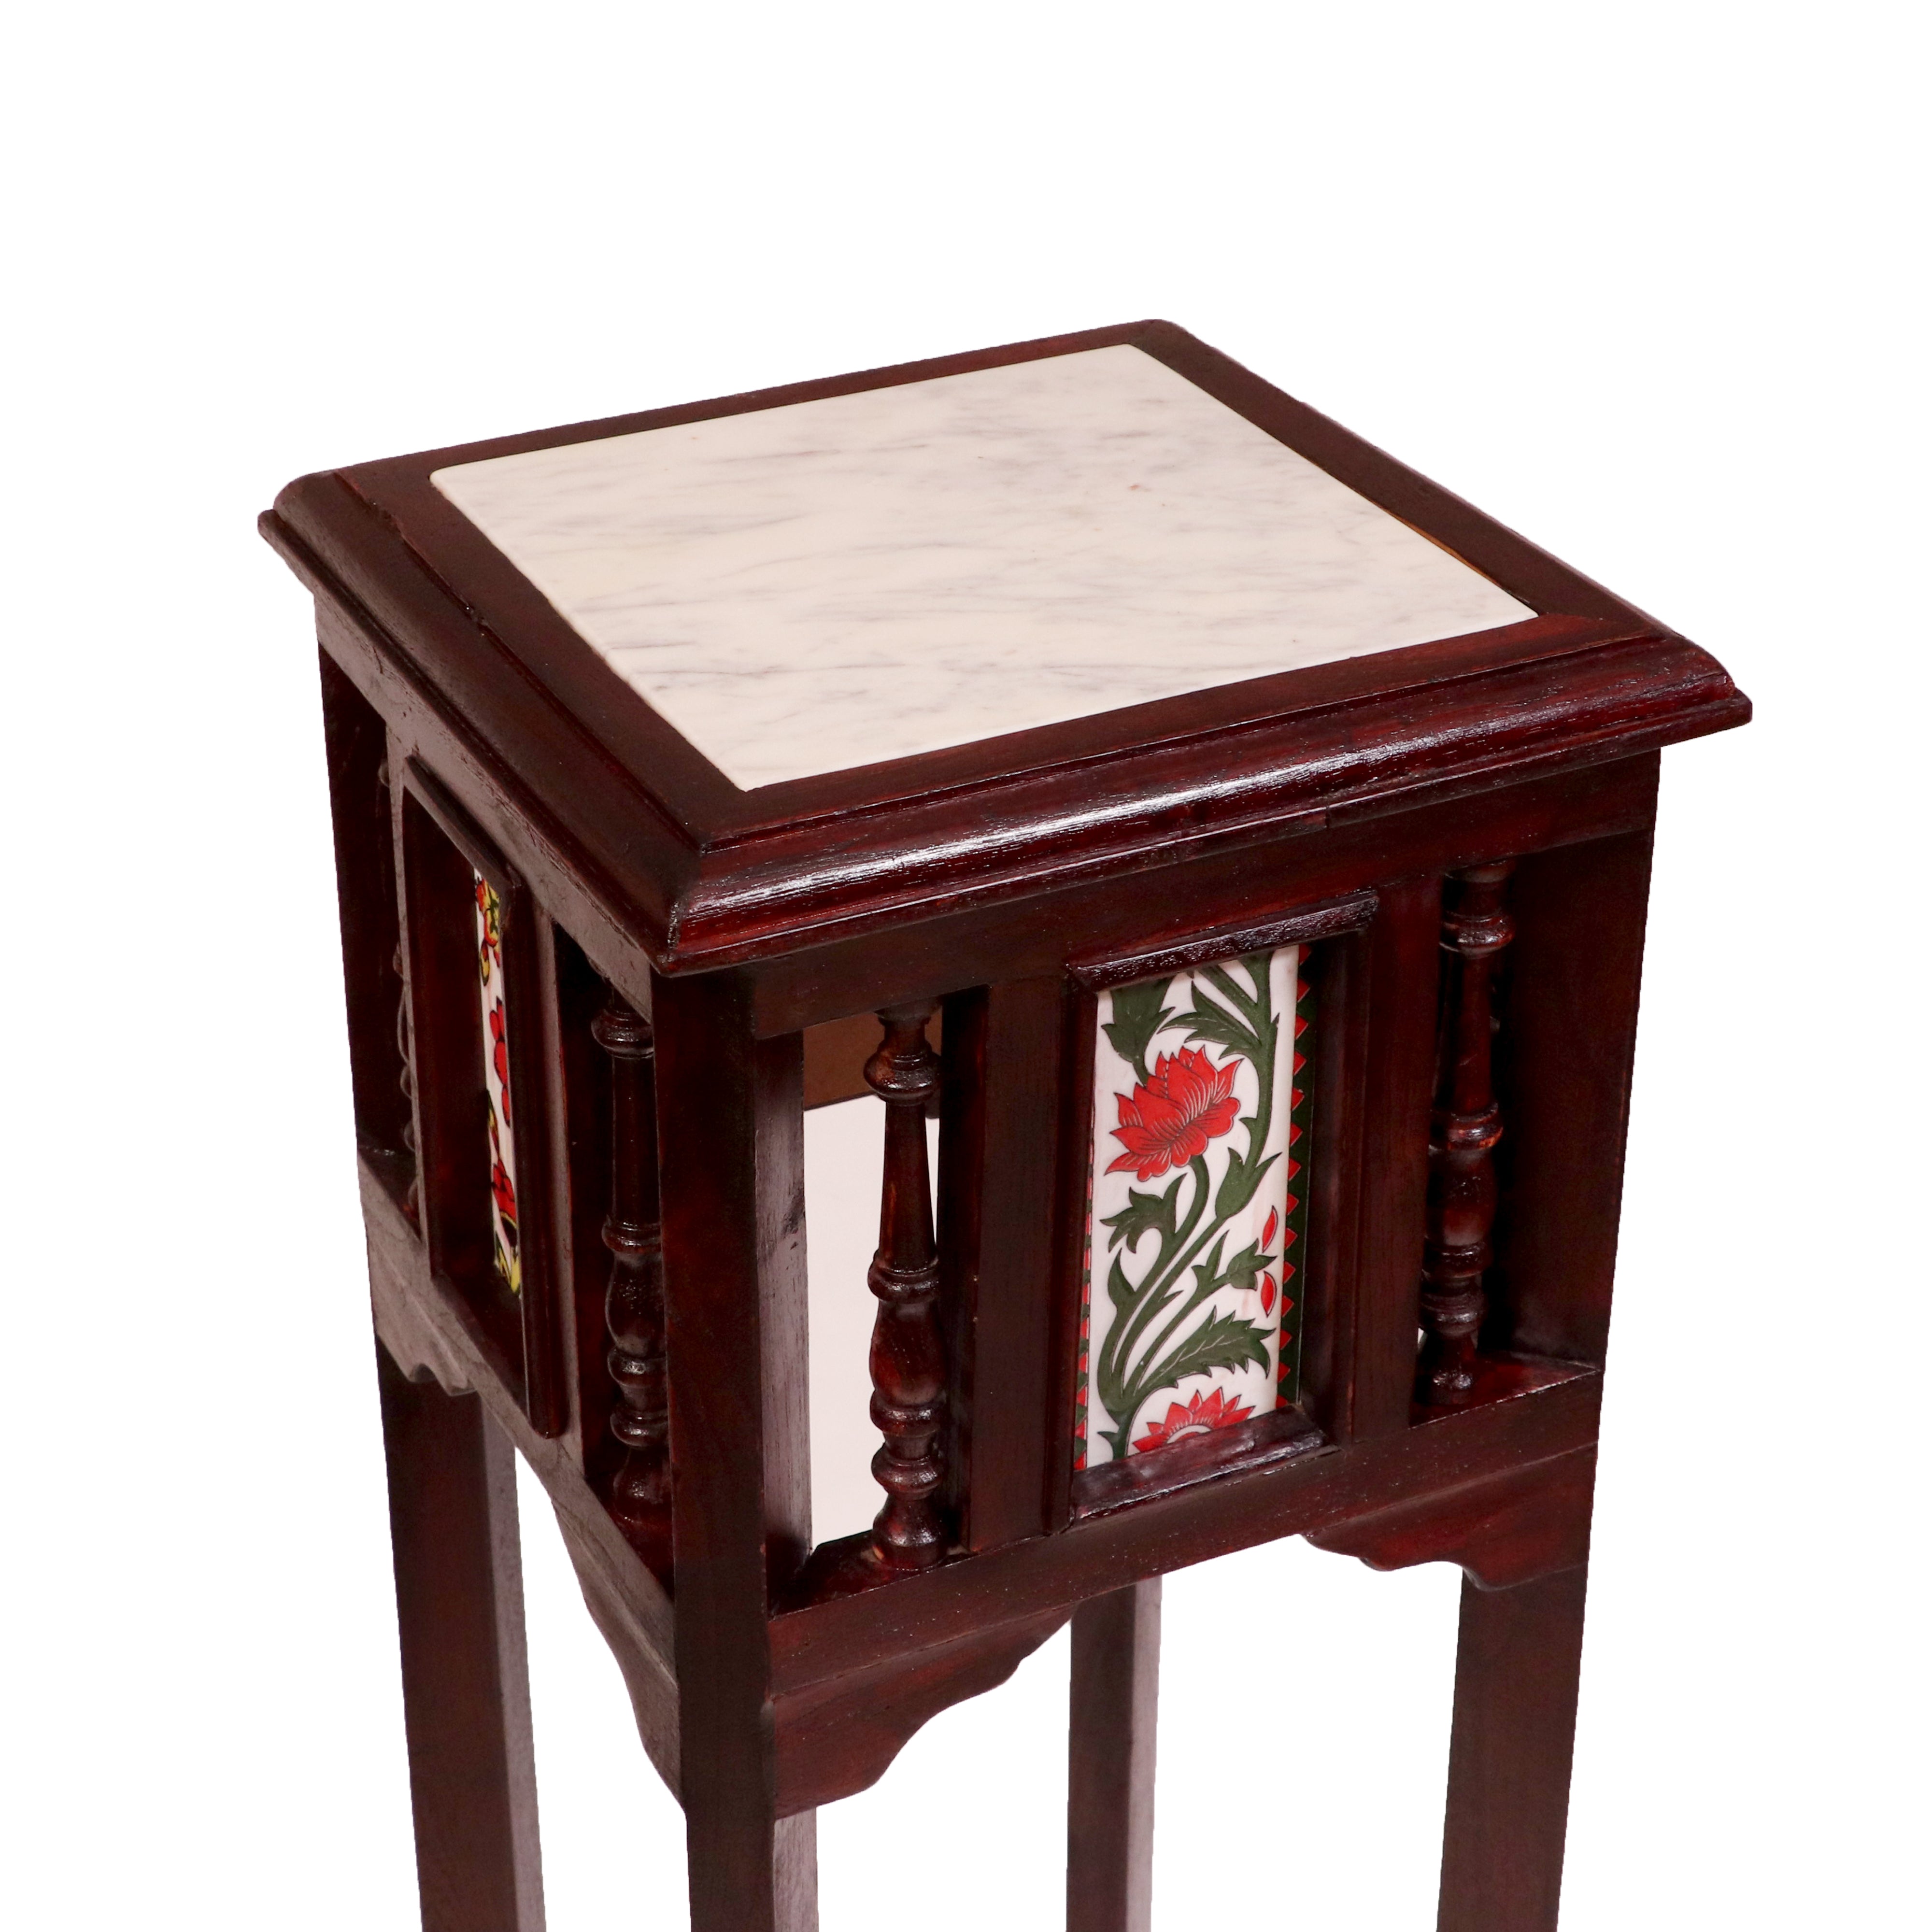 Teak ceramic tile end table with marble top End Table